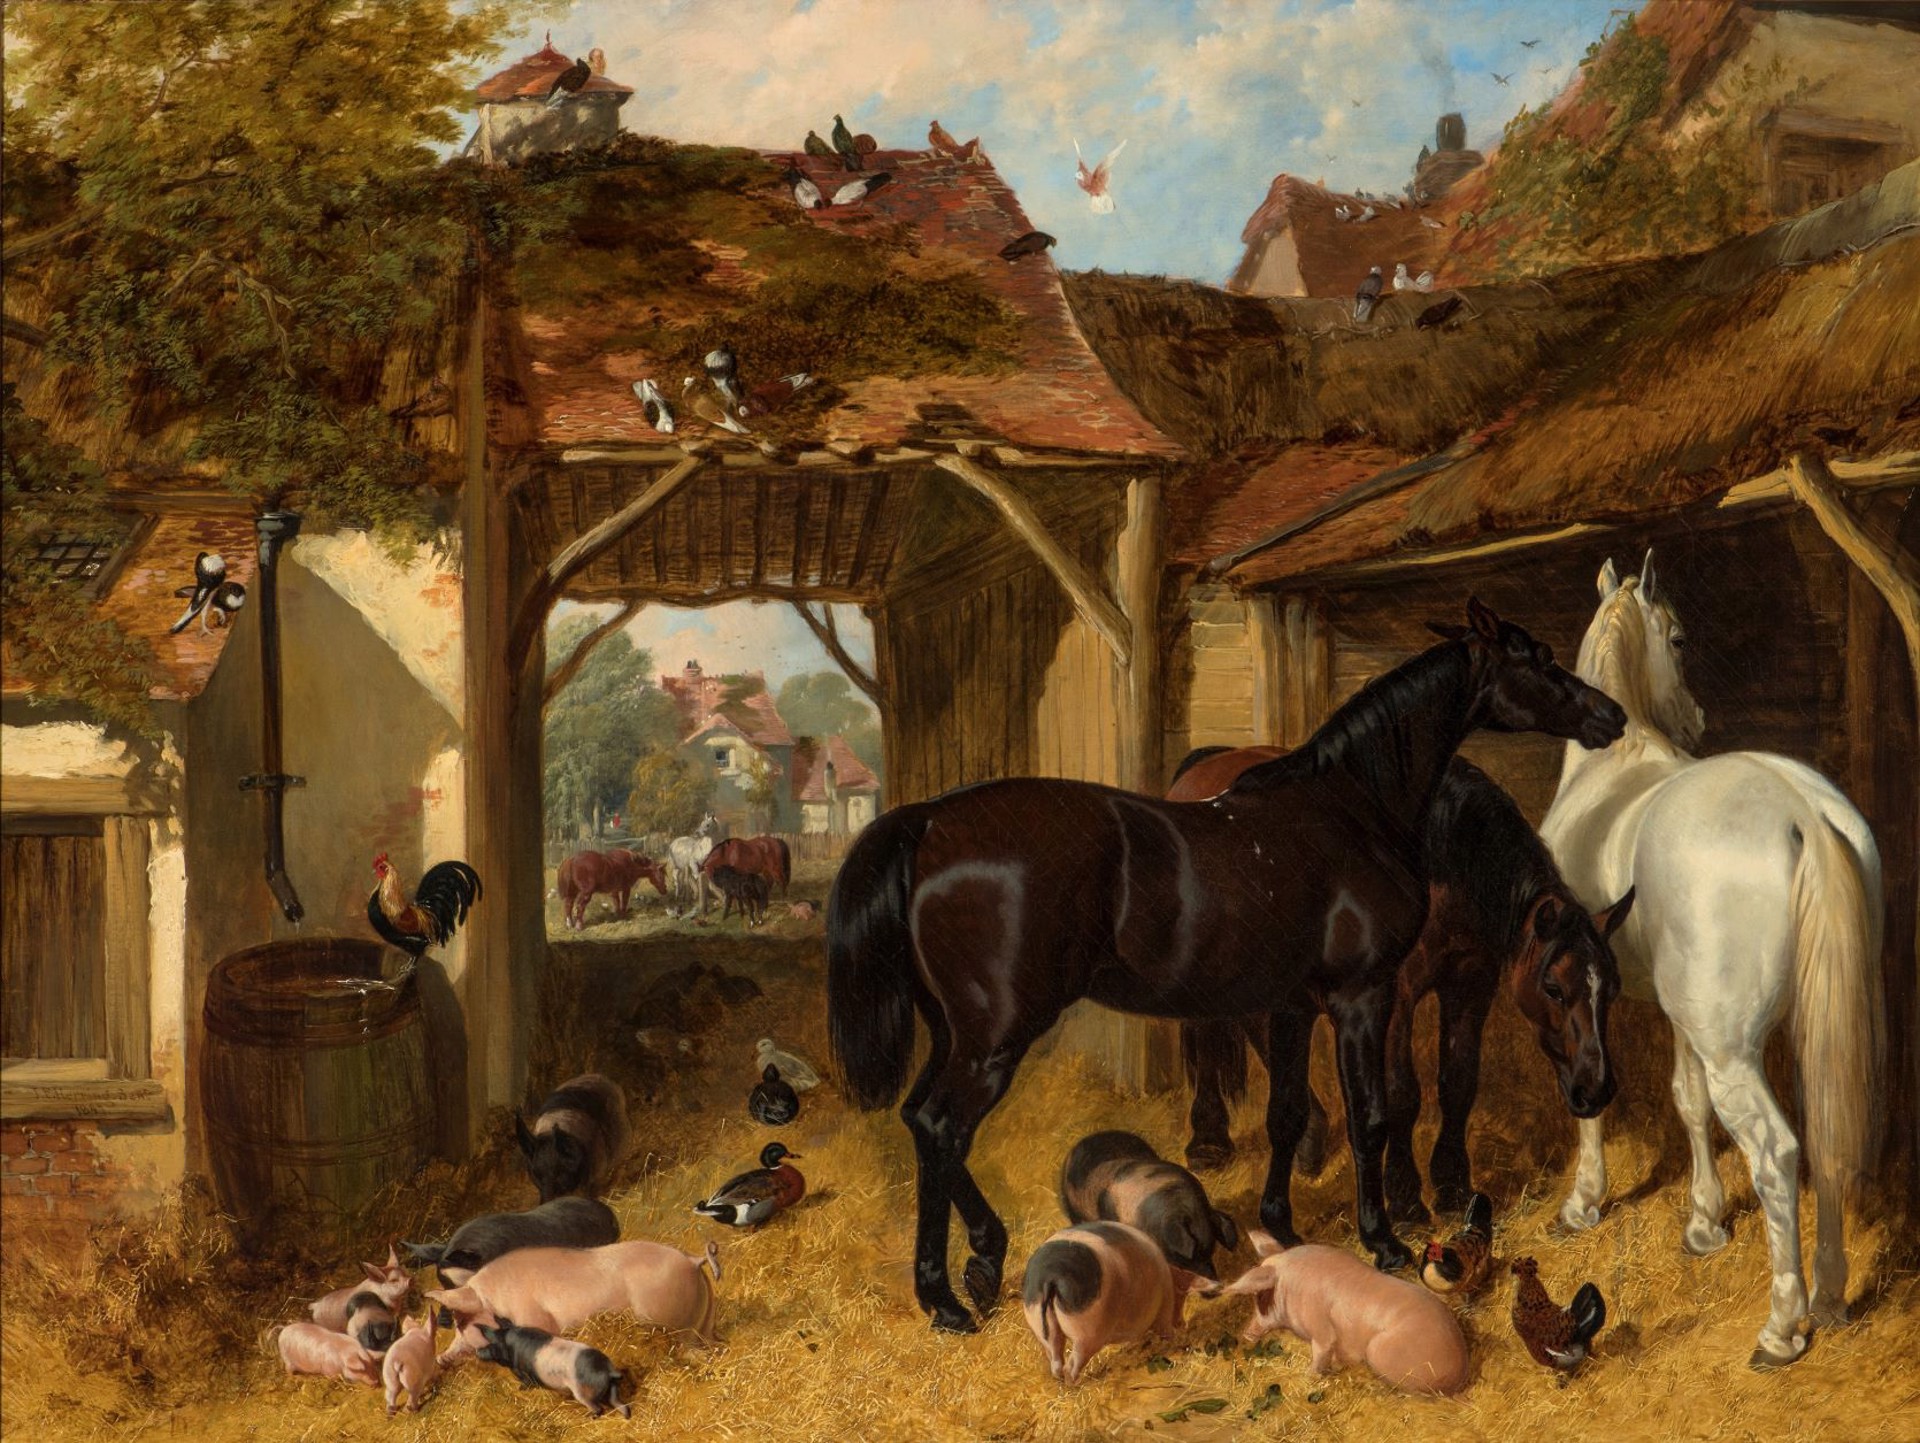 Horses, Pigs and Poultry in a Farmyard by John Frederick Herring, Sr.